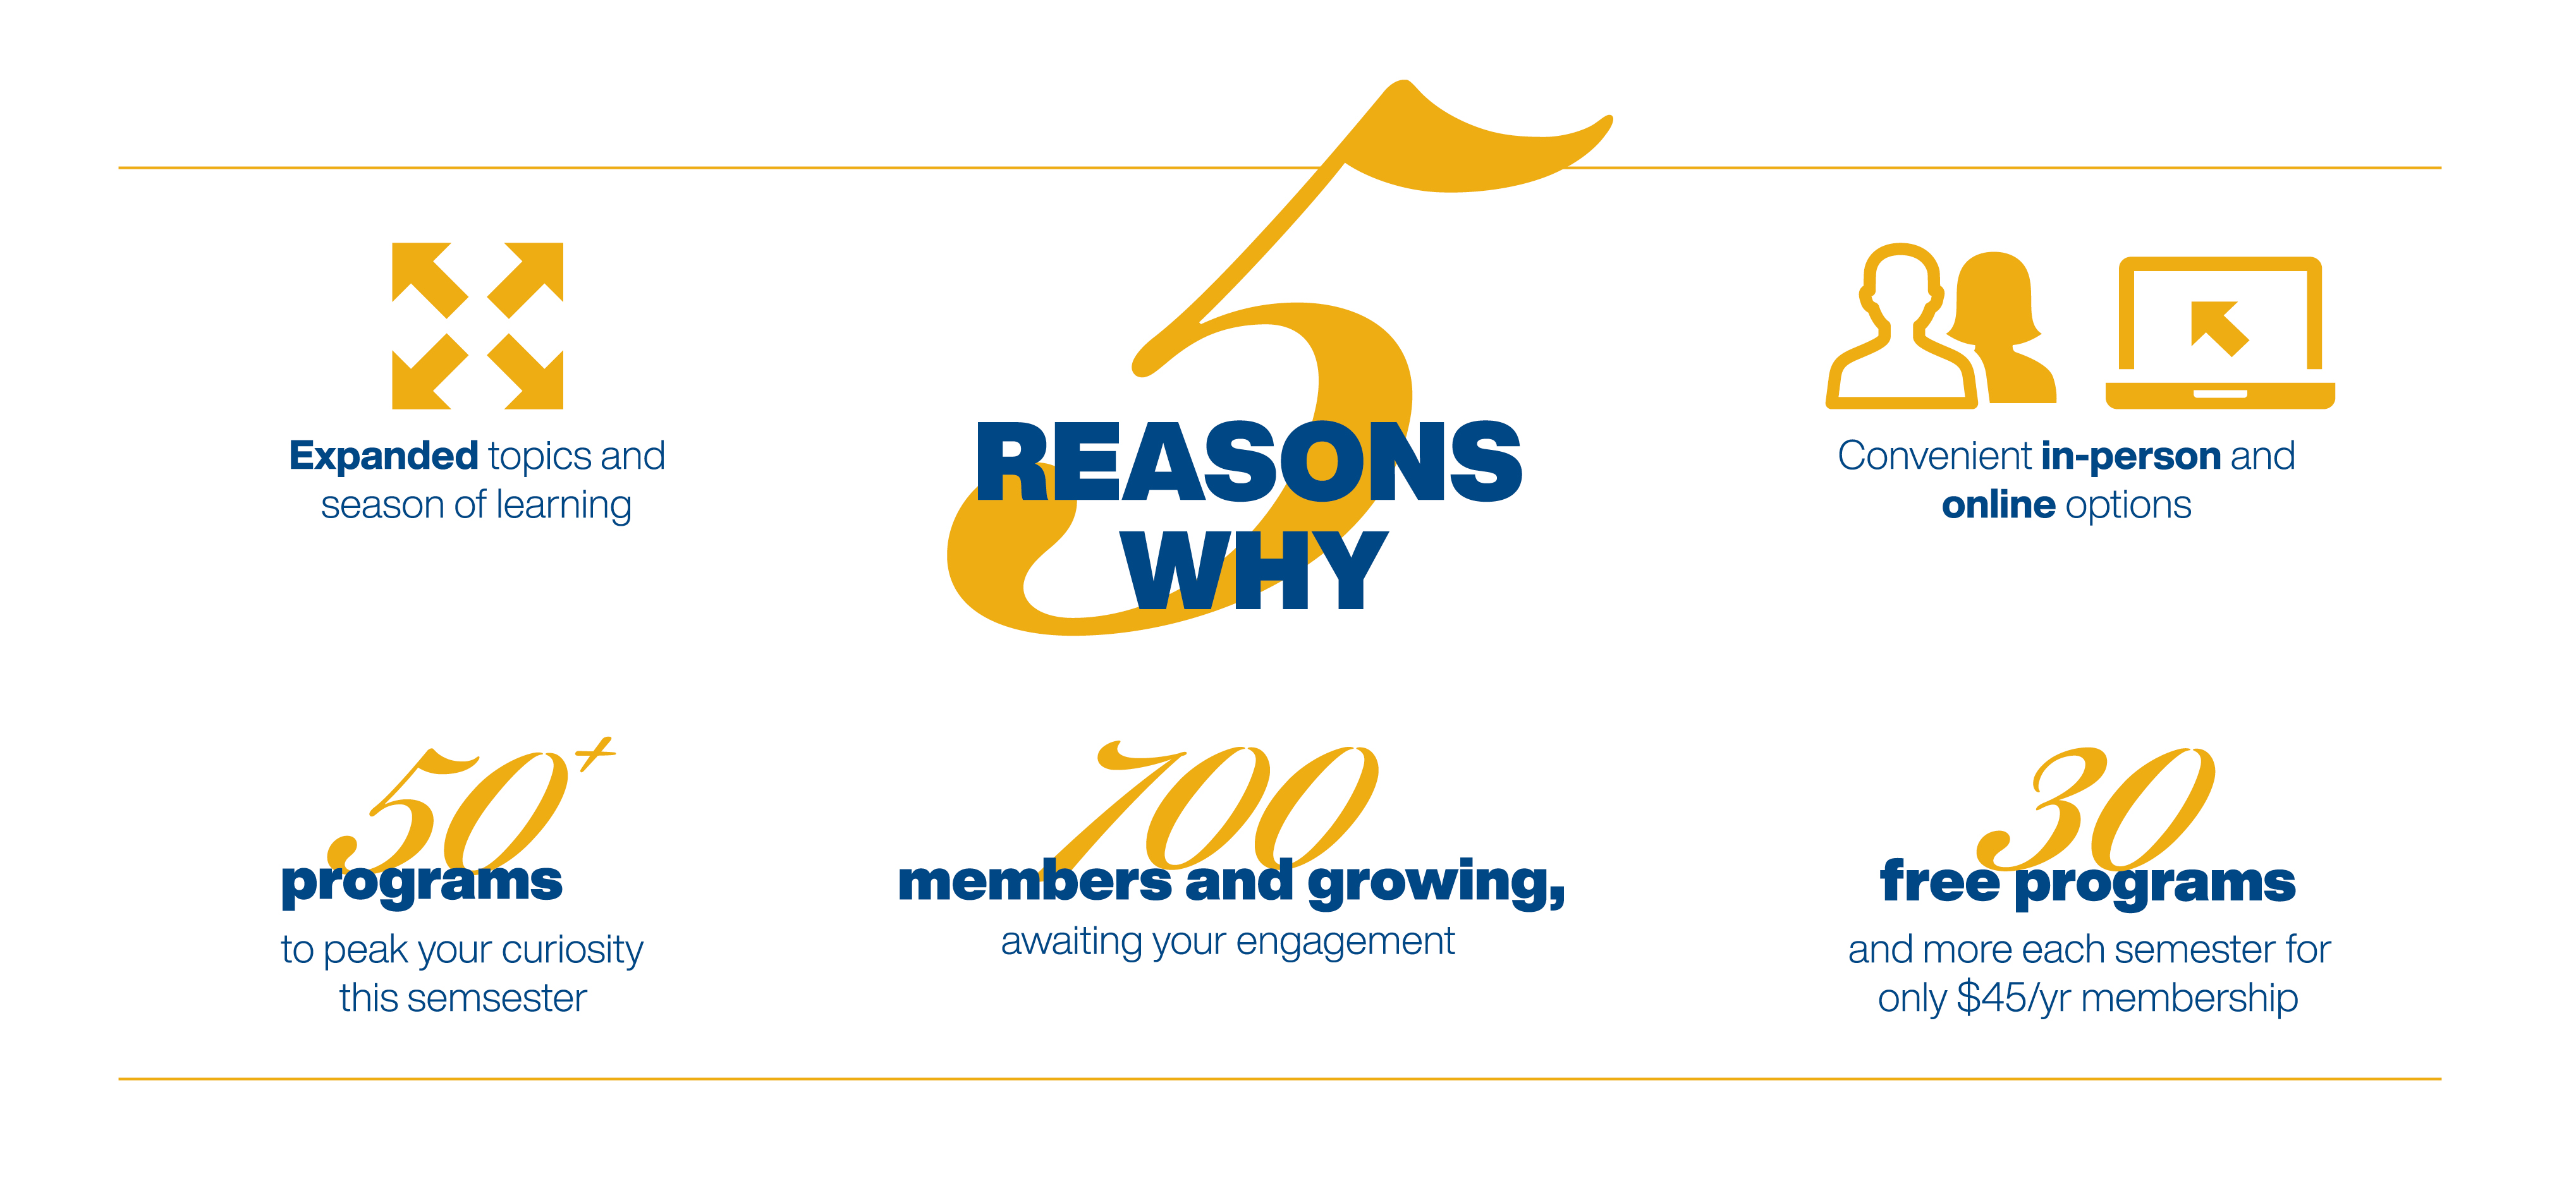 Five Reasons Why: expanded topics and season of learning; convenient in-person and online options; 50+ programs to pique your curiosity this semester; 550 members and growing, awaiting your engagement; 30 free programs and more each semester for only $45 a year membership